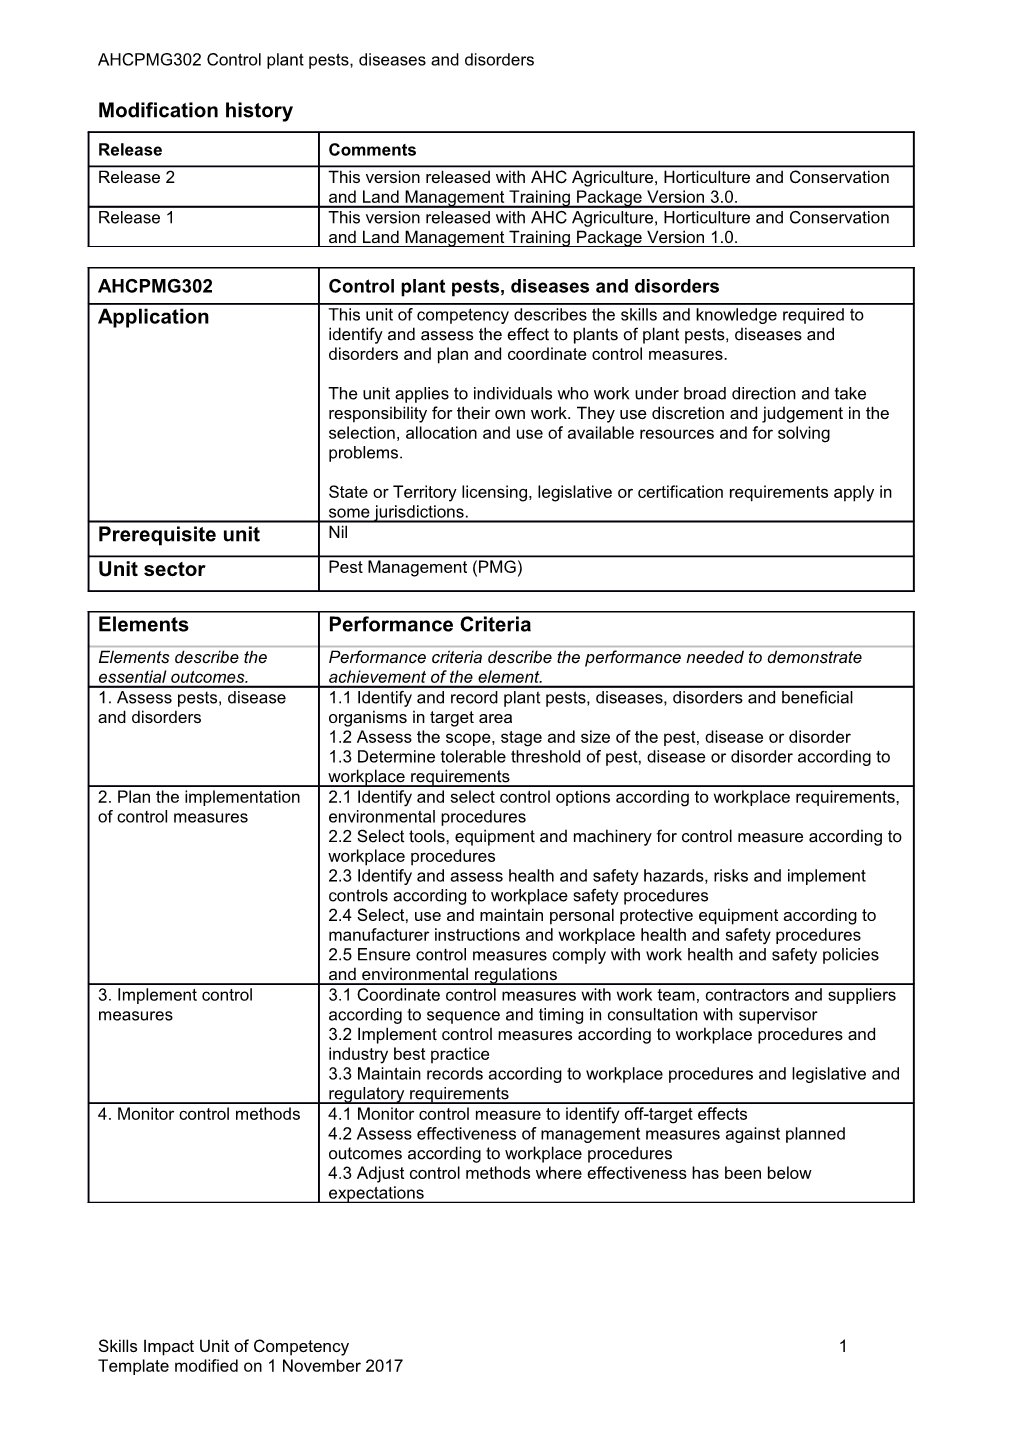 Skills Impact Unit of Competency Template s13